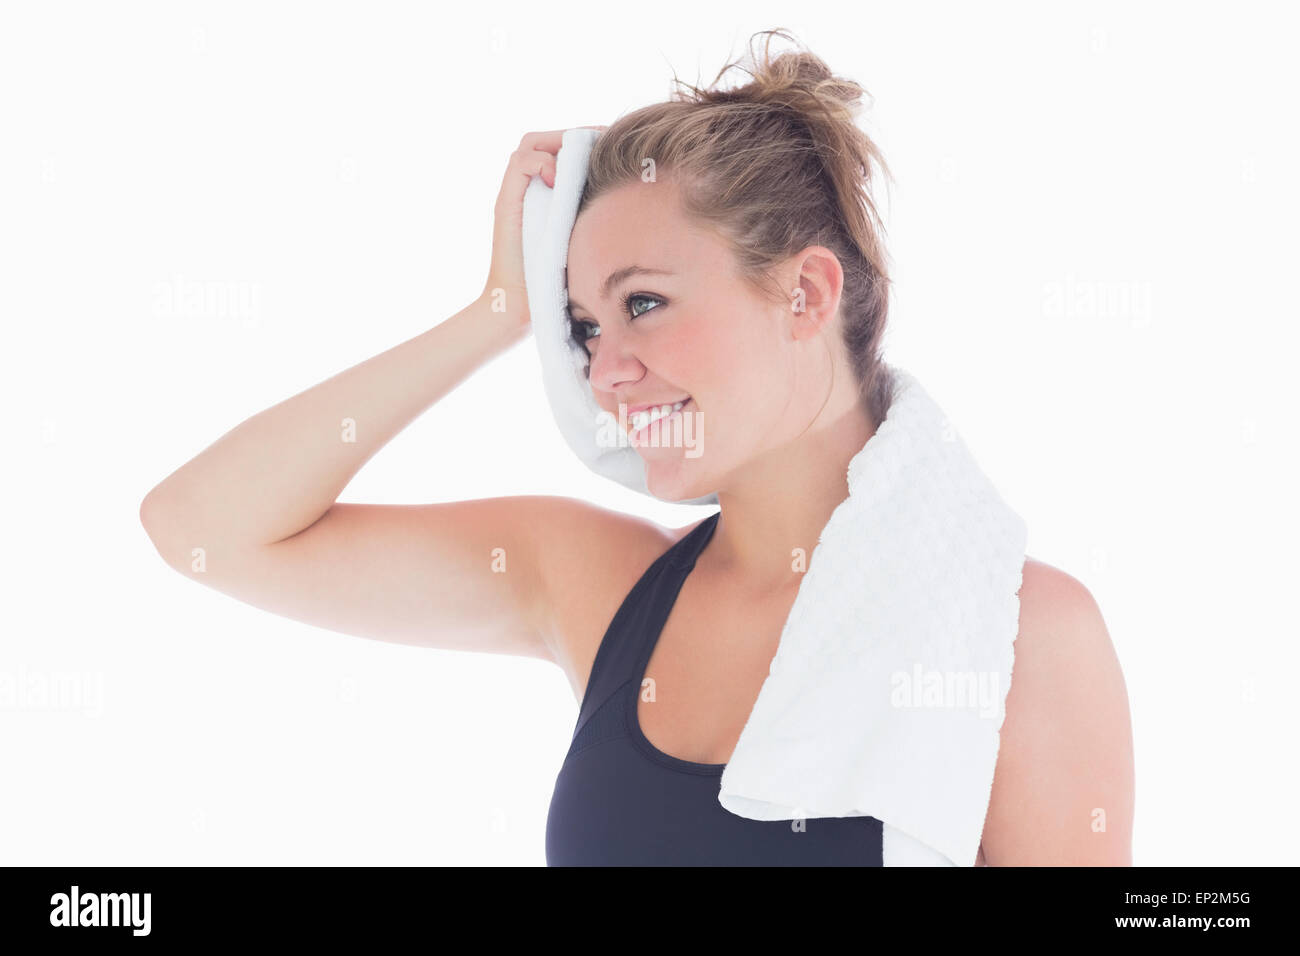 Woman smiling while holding towel at her forehead Stock Photo